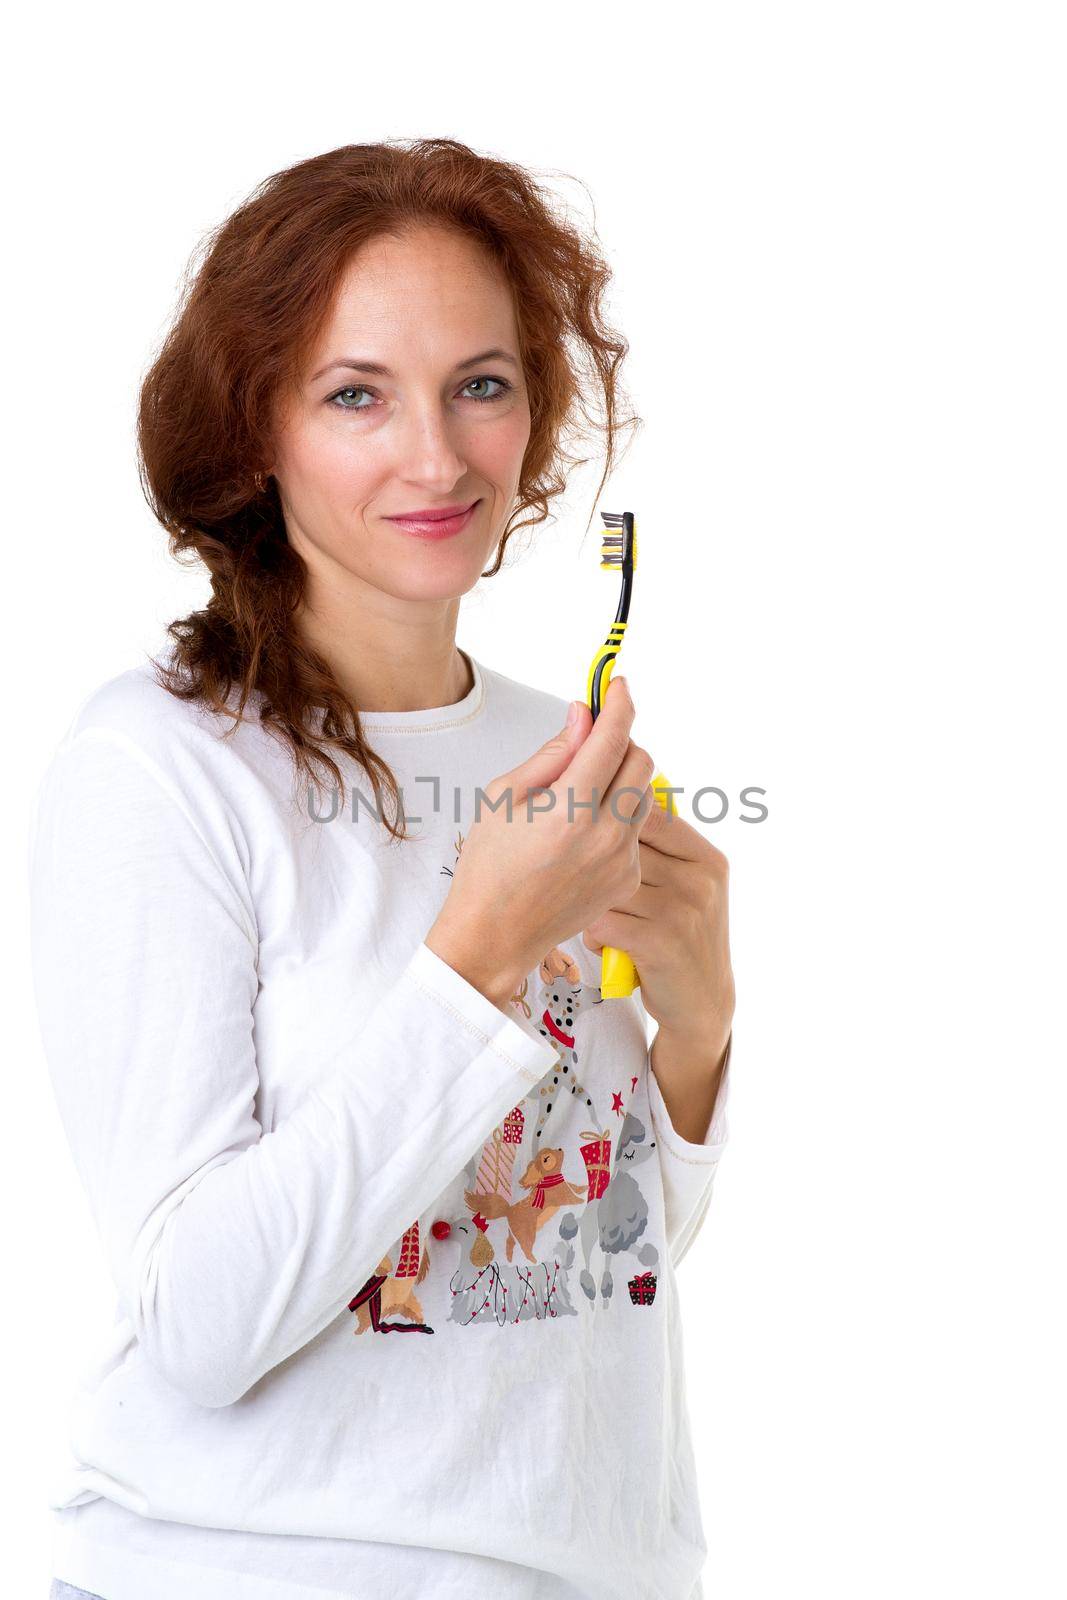 Young woman holding tooth brush and toothpaste. Portrait of smiling woman wearing casual clothes standing against white background. Healthy lifestyle, daily routine concept